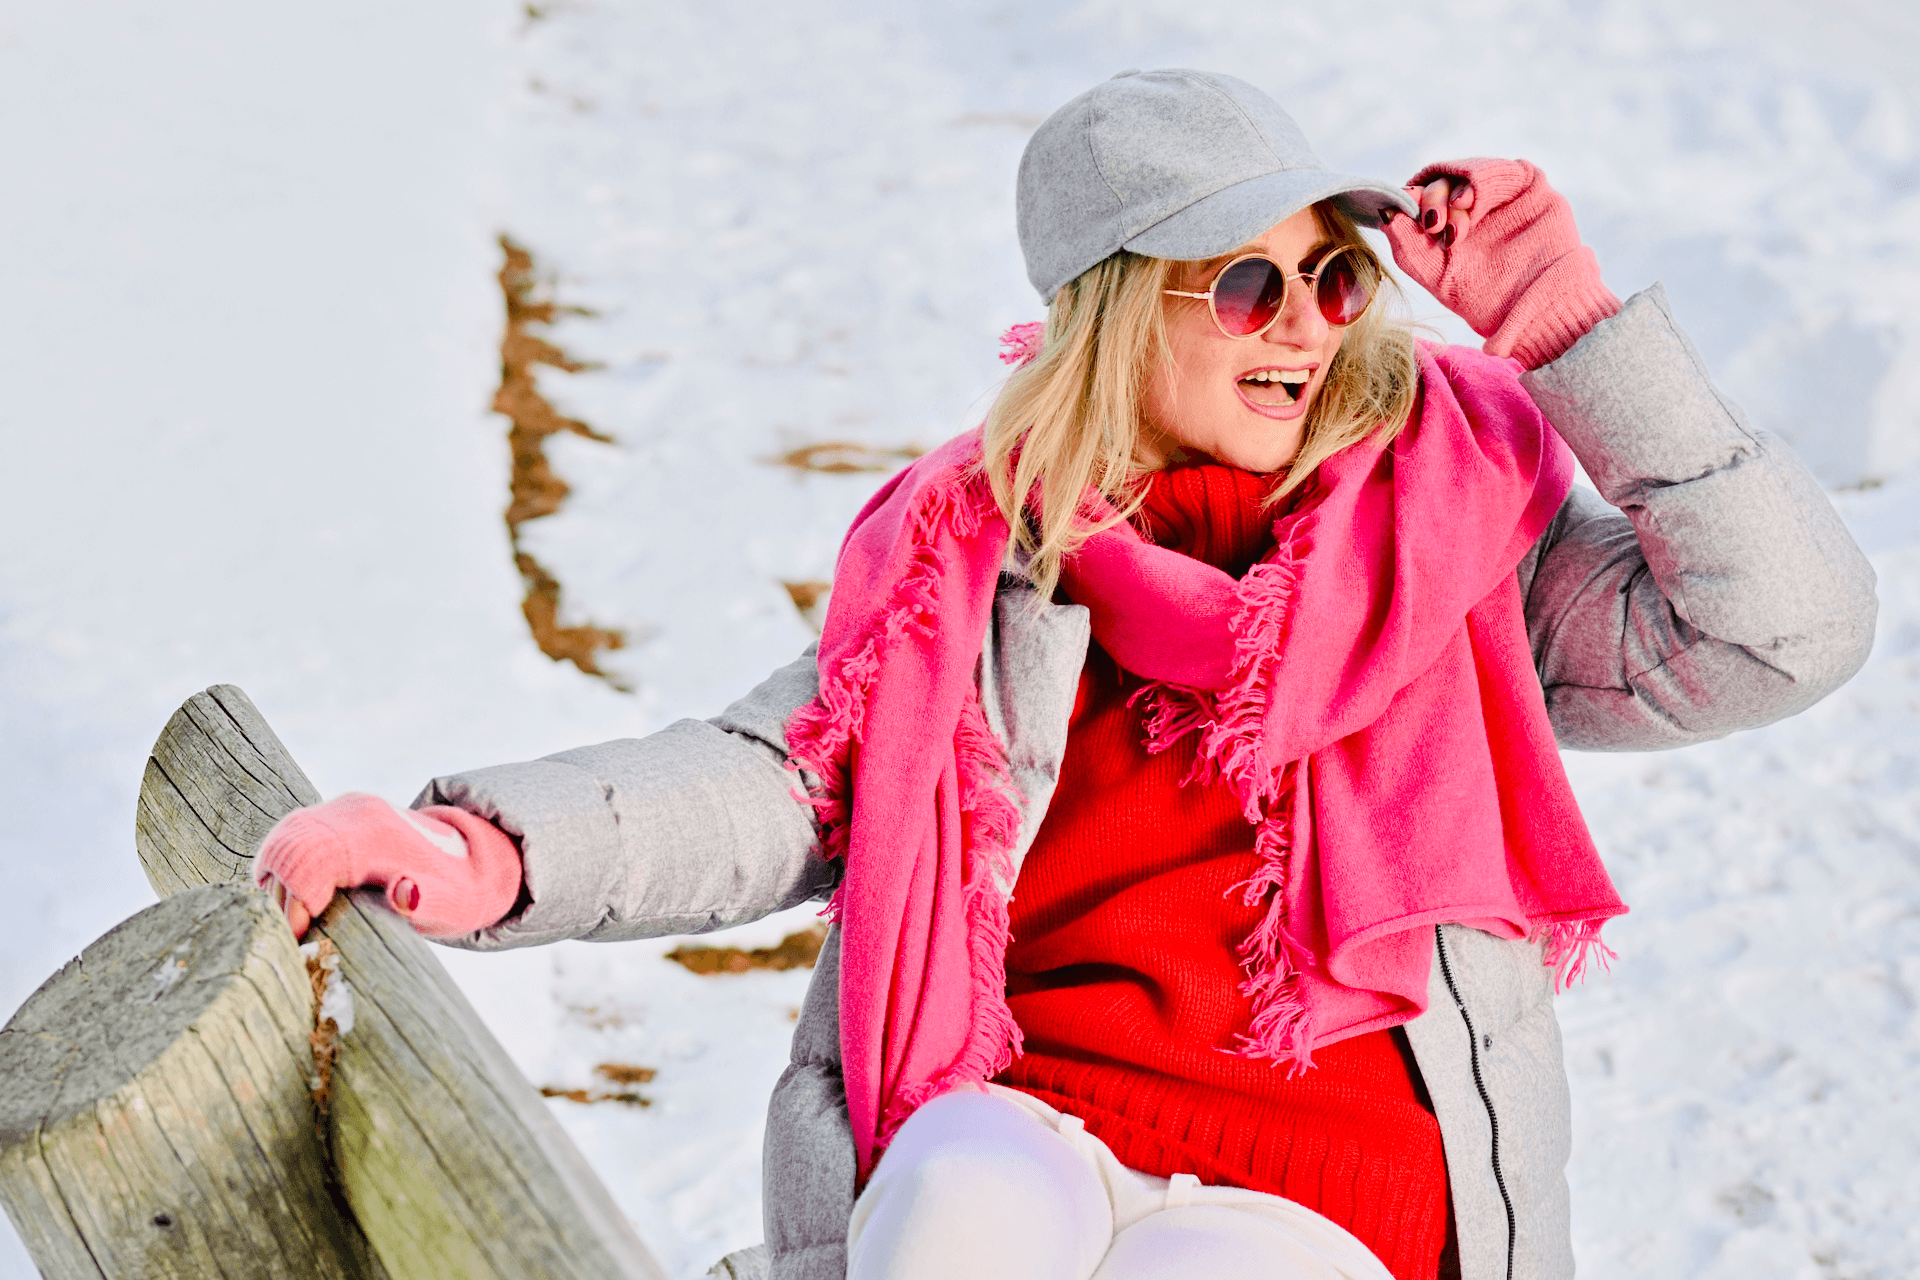 St Moritz the Winter Expert - these 6 Fashion Trends are Big News for 2023